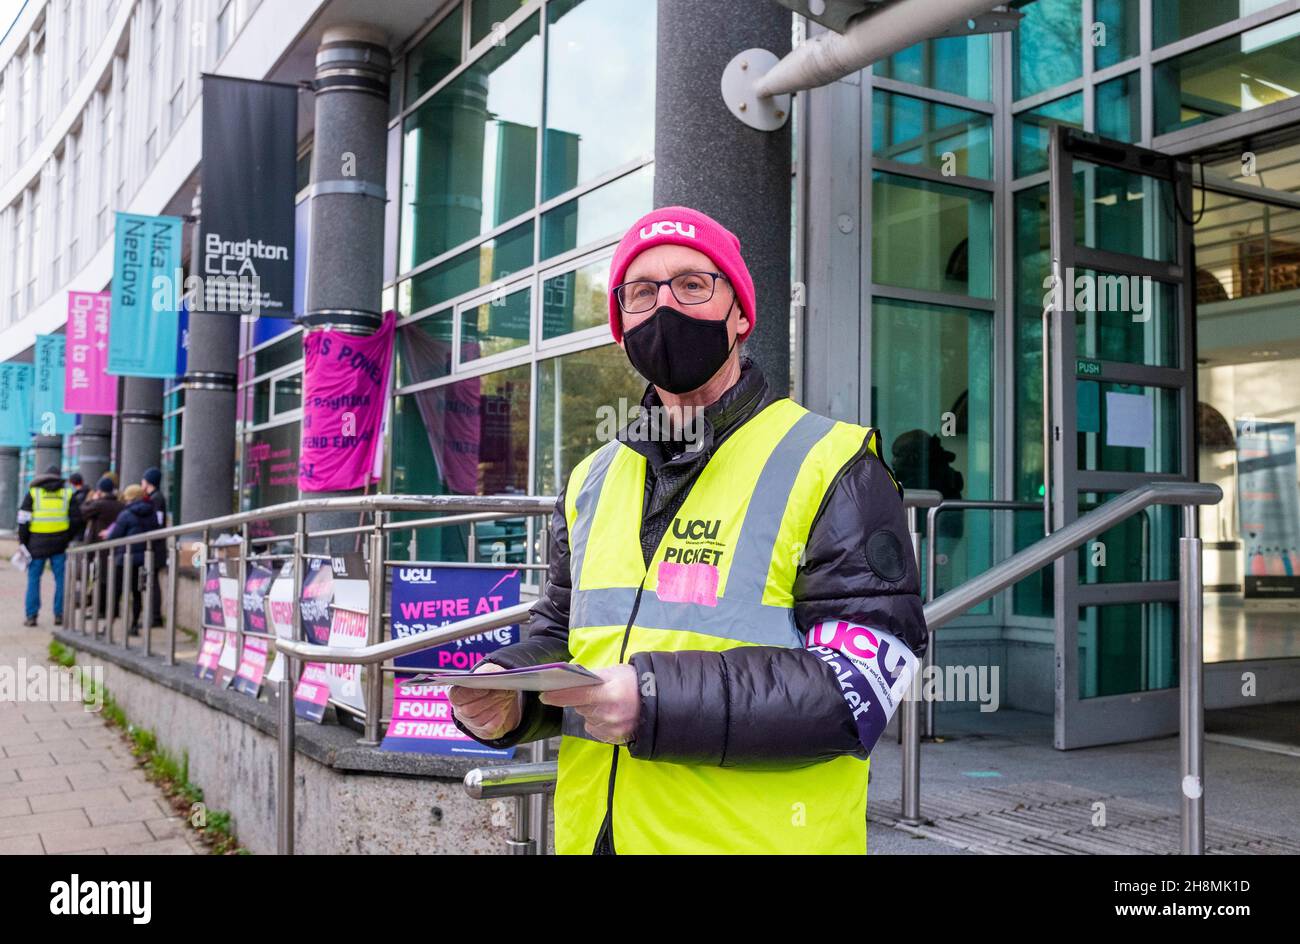 Brighton UK 1st December 2021 - The University and College Union picket line outside the Grand Parade campus of the University of Brighton this morning . Staff at 58 universities and colleges are striking over pay and conditions and to stop cuts to pensions  : Credit Simon Dack / Alamy Live News Stock Photo